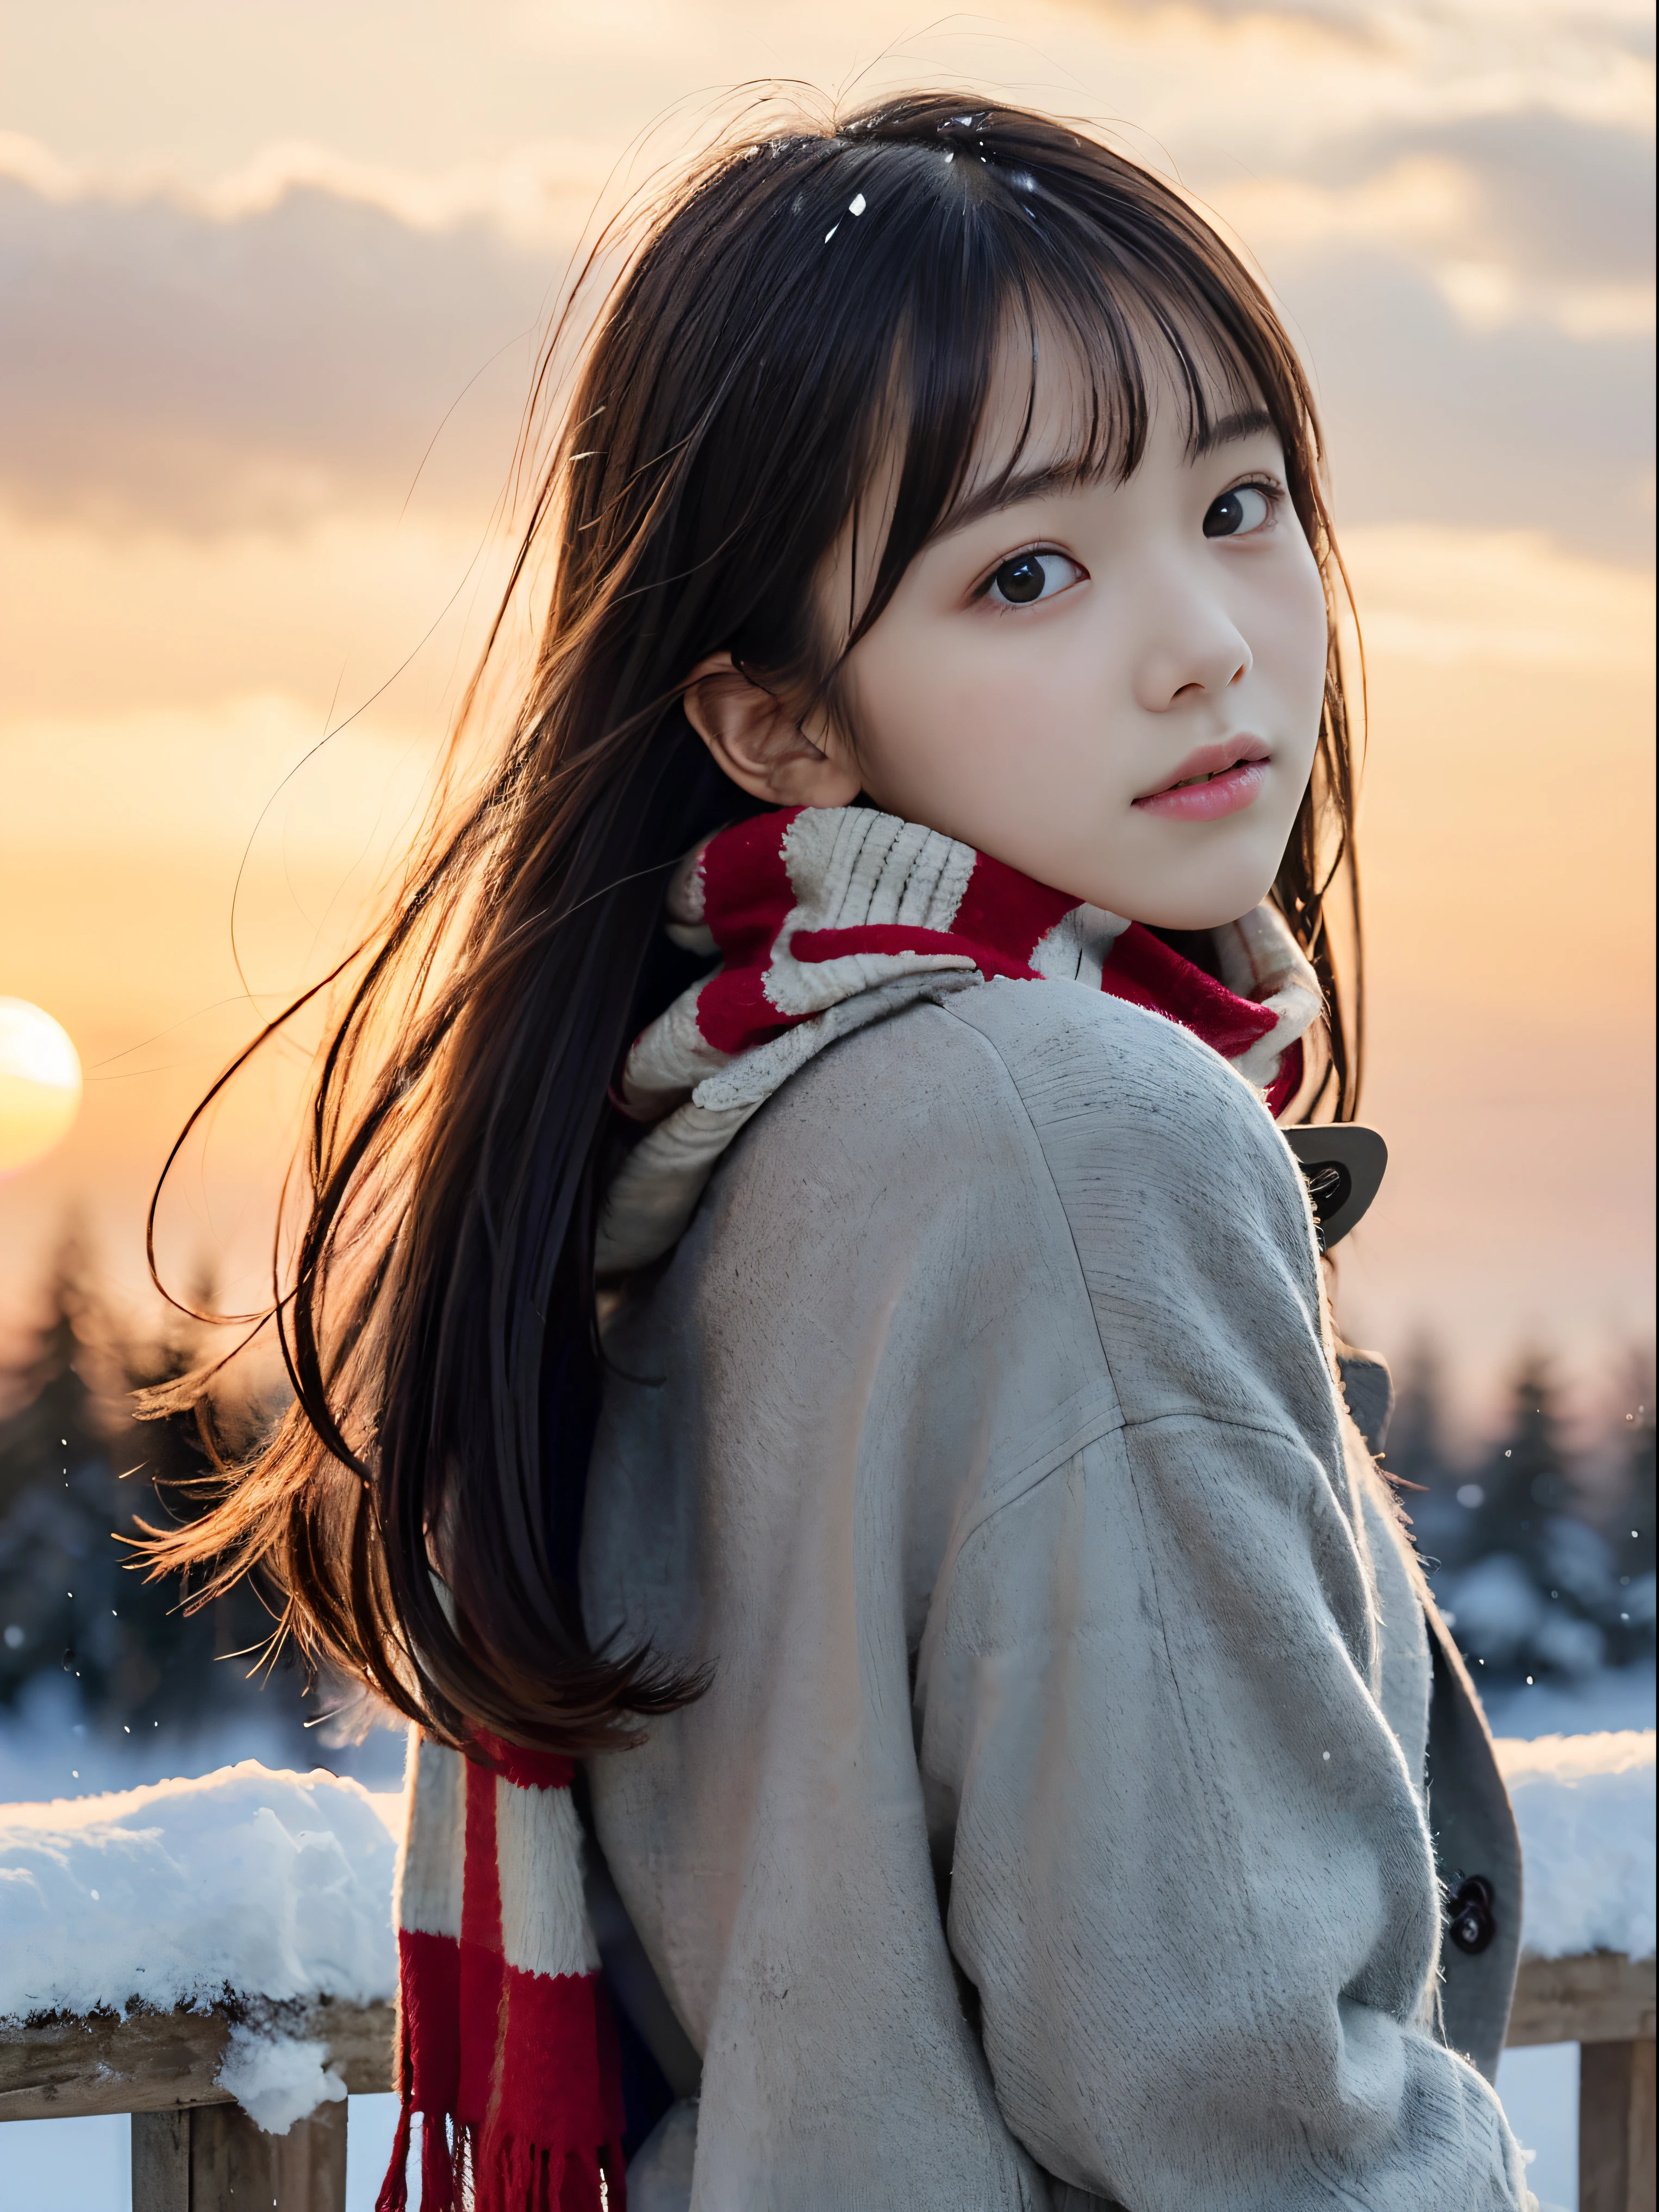 (Close up portrait of slender girl with long hair with dull bangs :1.5)、(The girl looks back with a sad face:1.5)、(The girl in winter uniform with scarf and winter coat:1.5)、(Beautiful snowy sunset red sky:1.5)、(Perfect Anatomy:1.3)、(No mask:1.3)、(complete fingers:1.3)、Photorealistic、Photography、masutepiece、top-quality、High resolution, delicate and pretty、face perfect、Beautiful detailed eyes、Fair skin、Real Human Skin、pores、((thin legs))、(Dark hair)